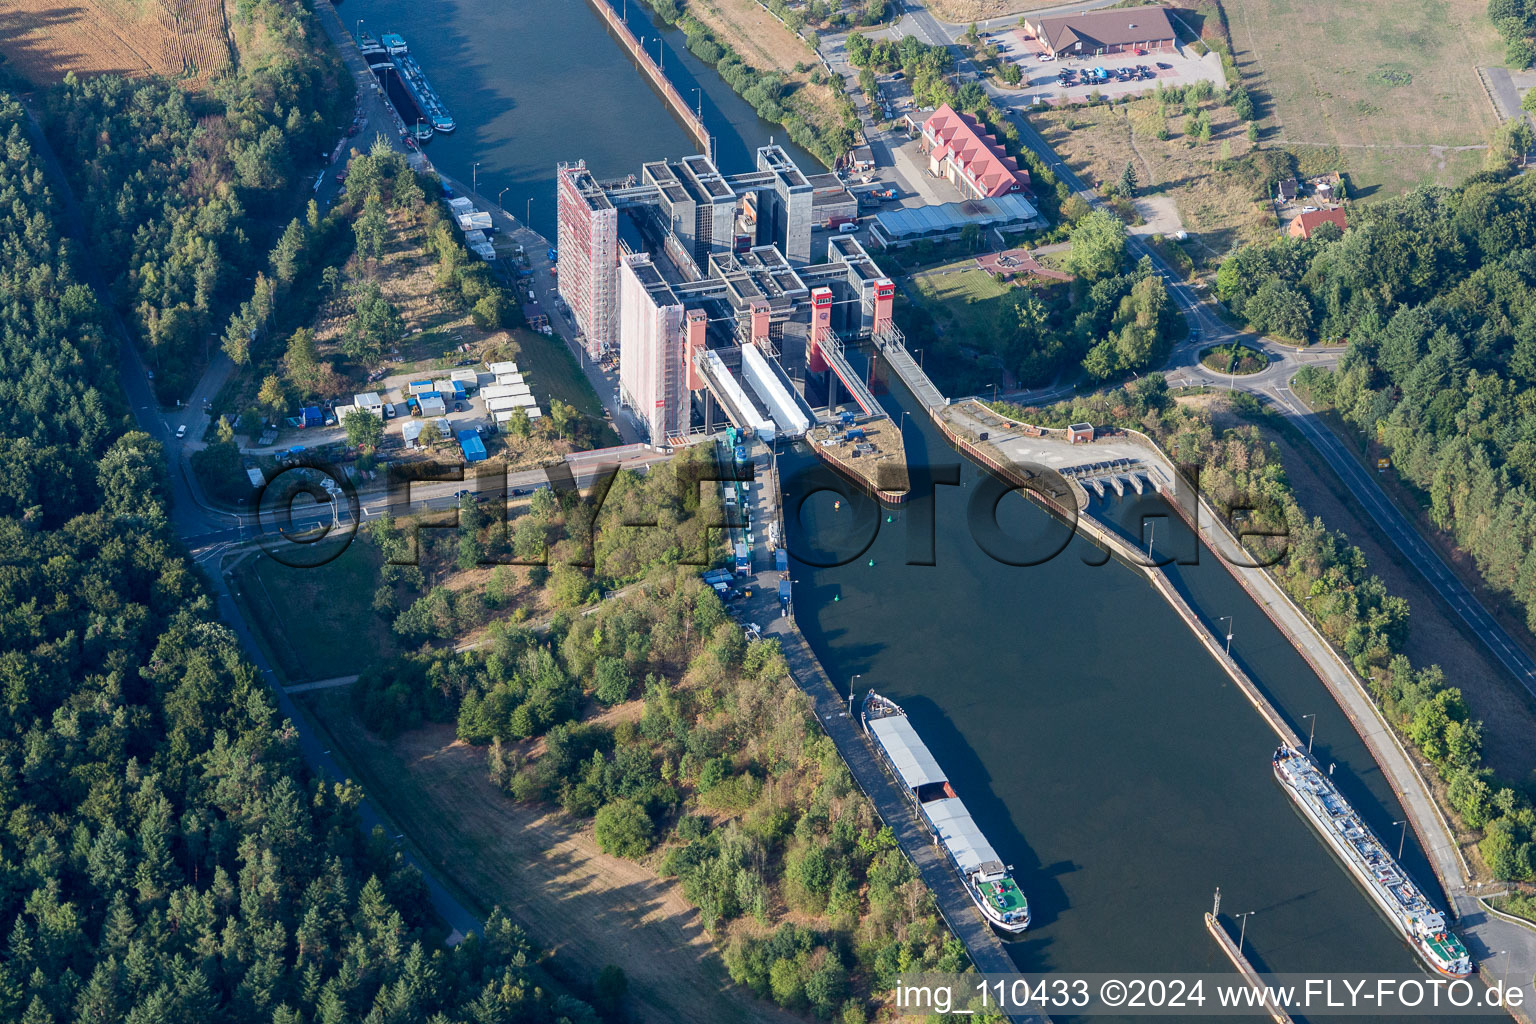 Boat lift and locks plants on the banks of the waterway of the Elbe side channel in Scharnebeck in the state Lower Saxony, Germany from above